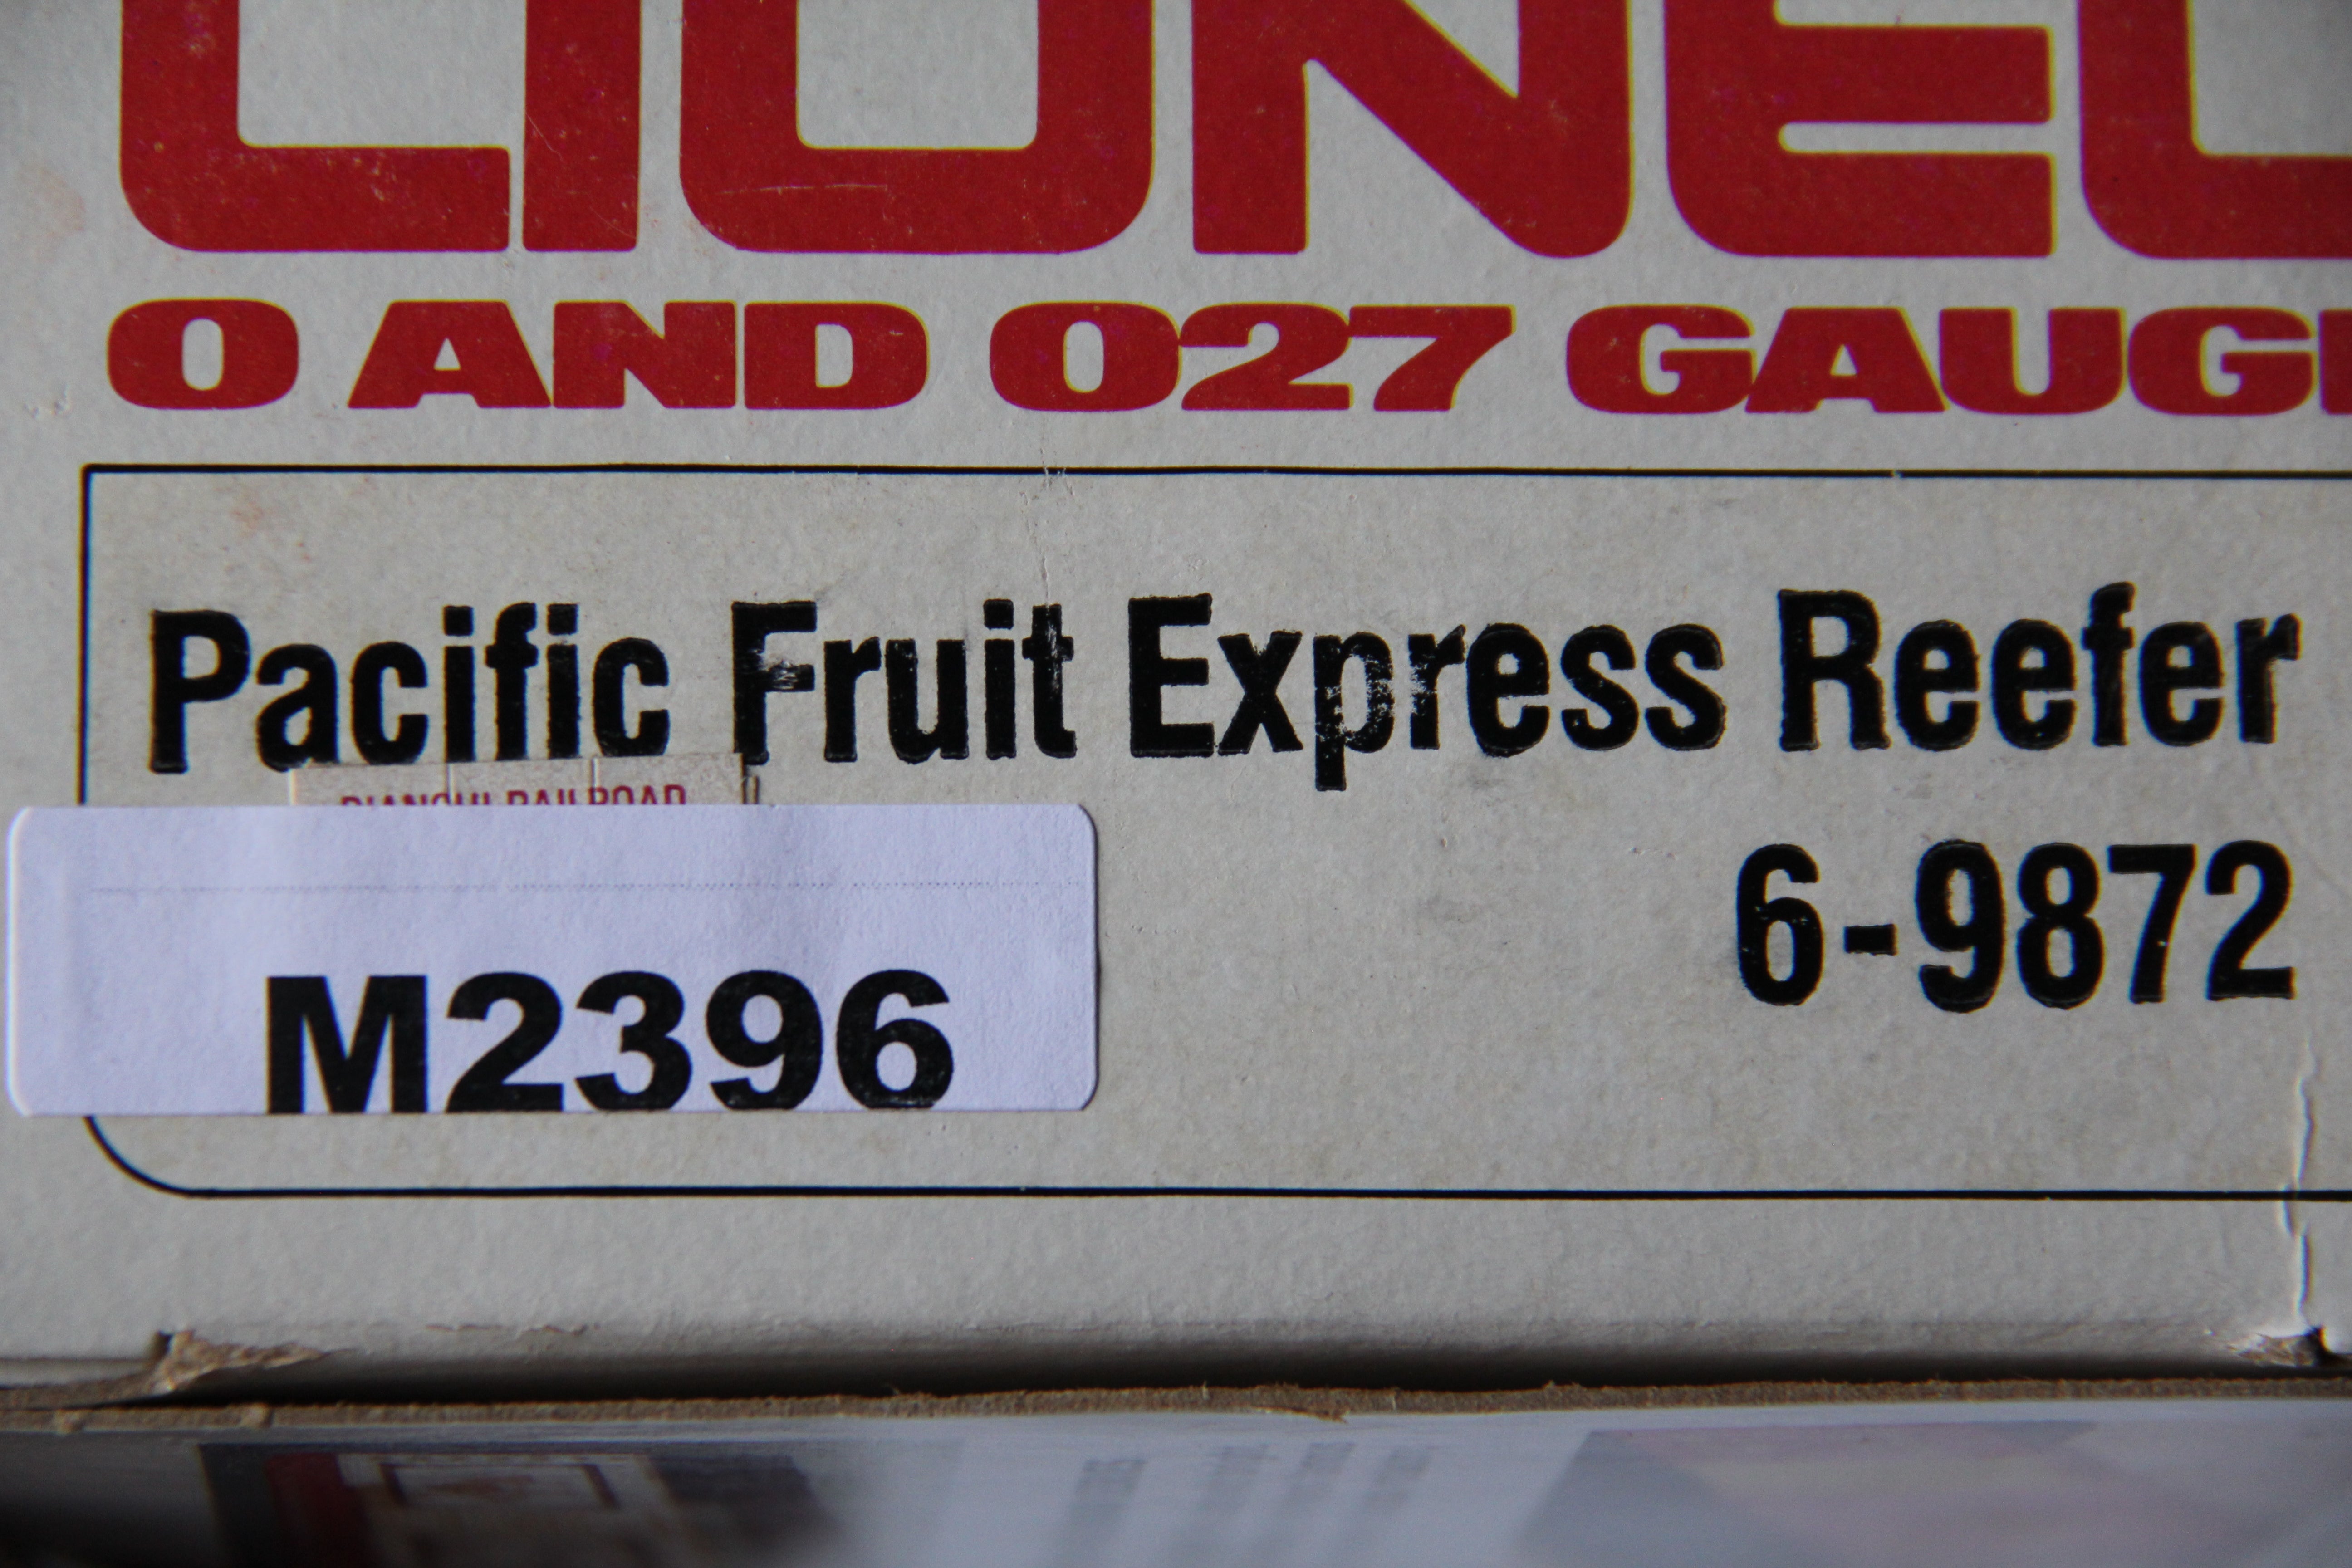 Lionel 6-9872 Pacific Fruit Express Reefer-Second hand-M2396